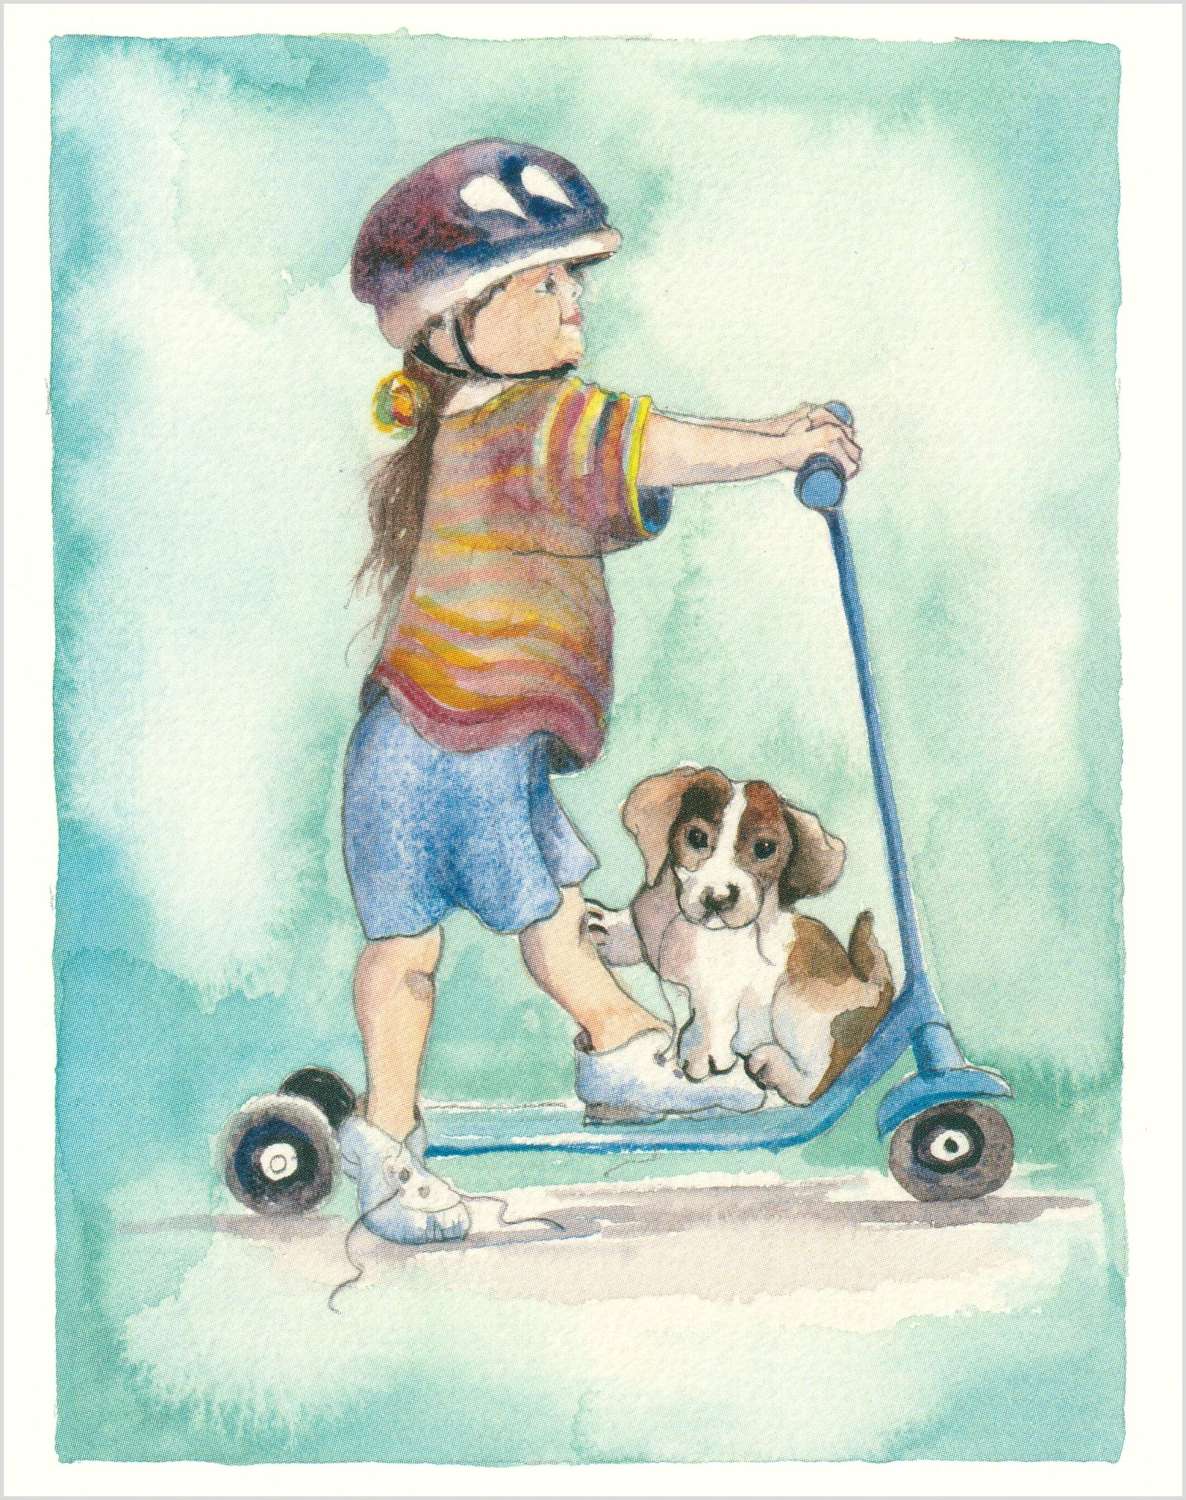 Girl & puppy on a scooter